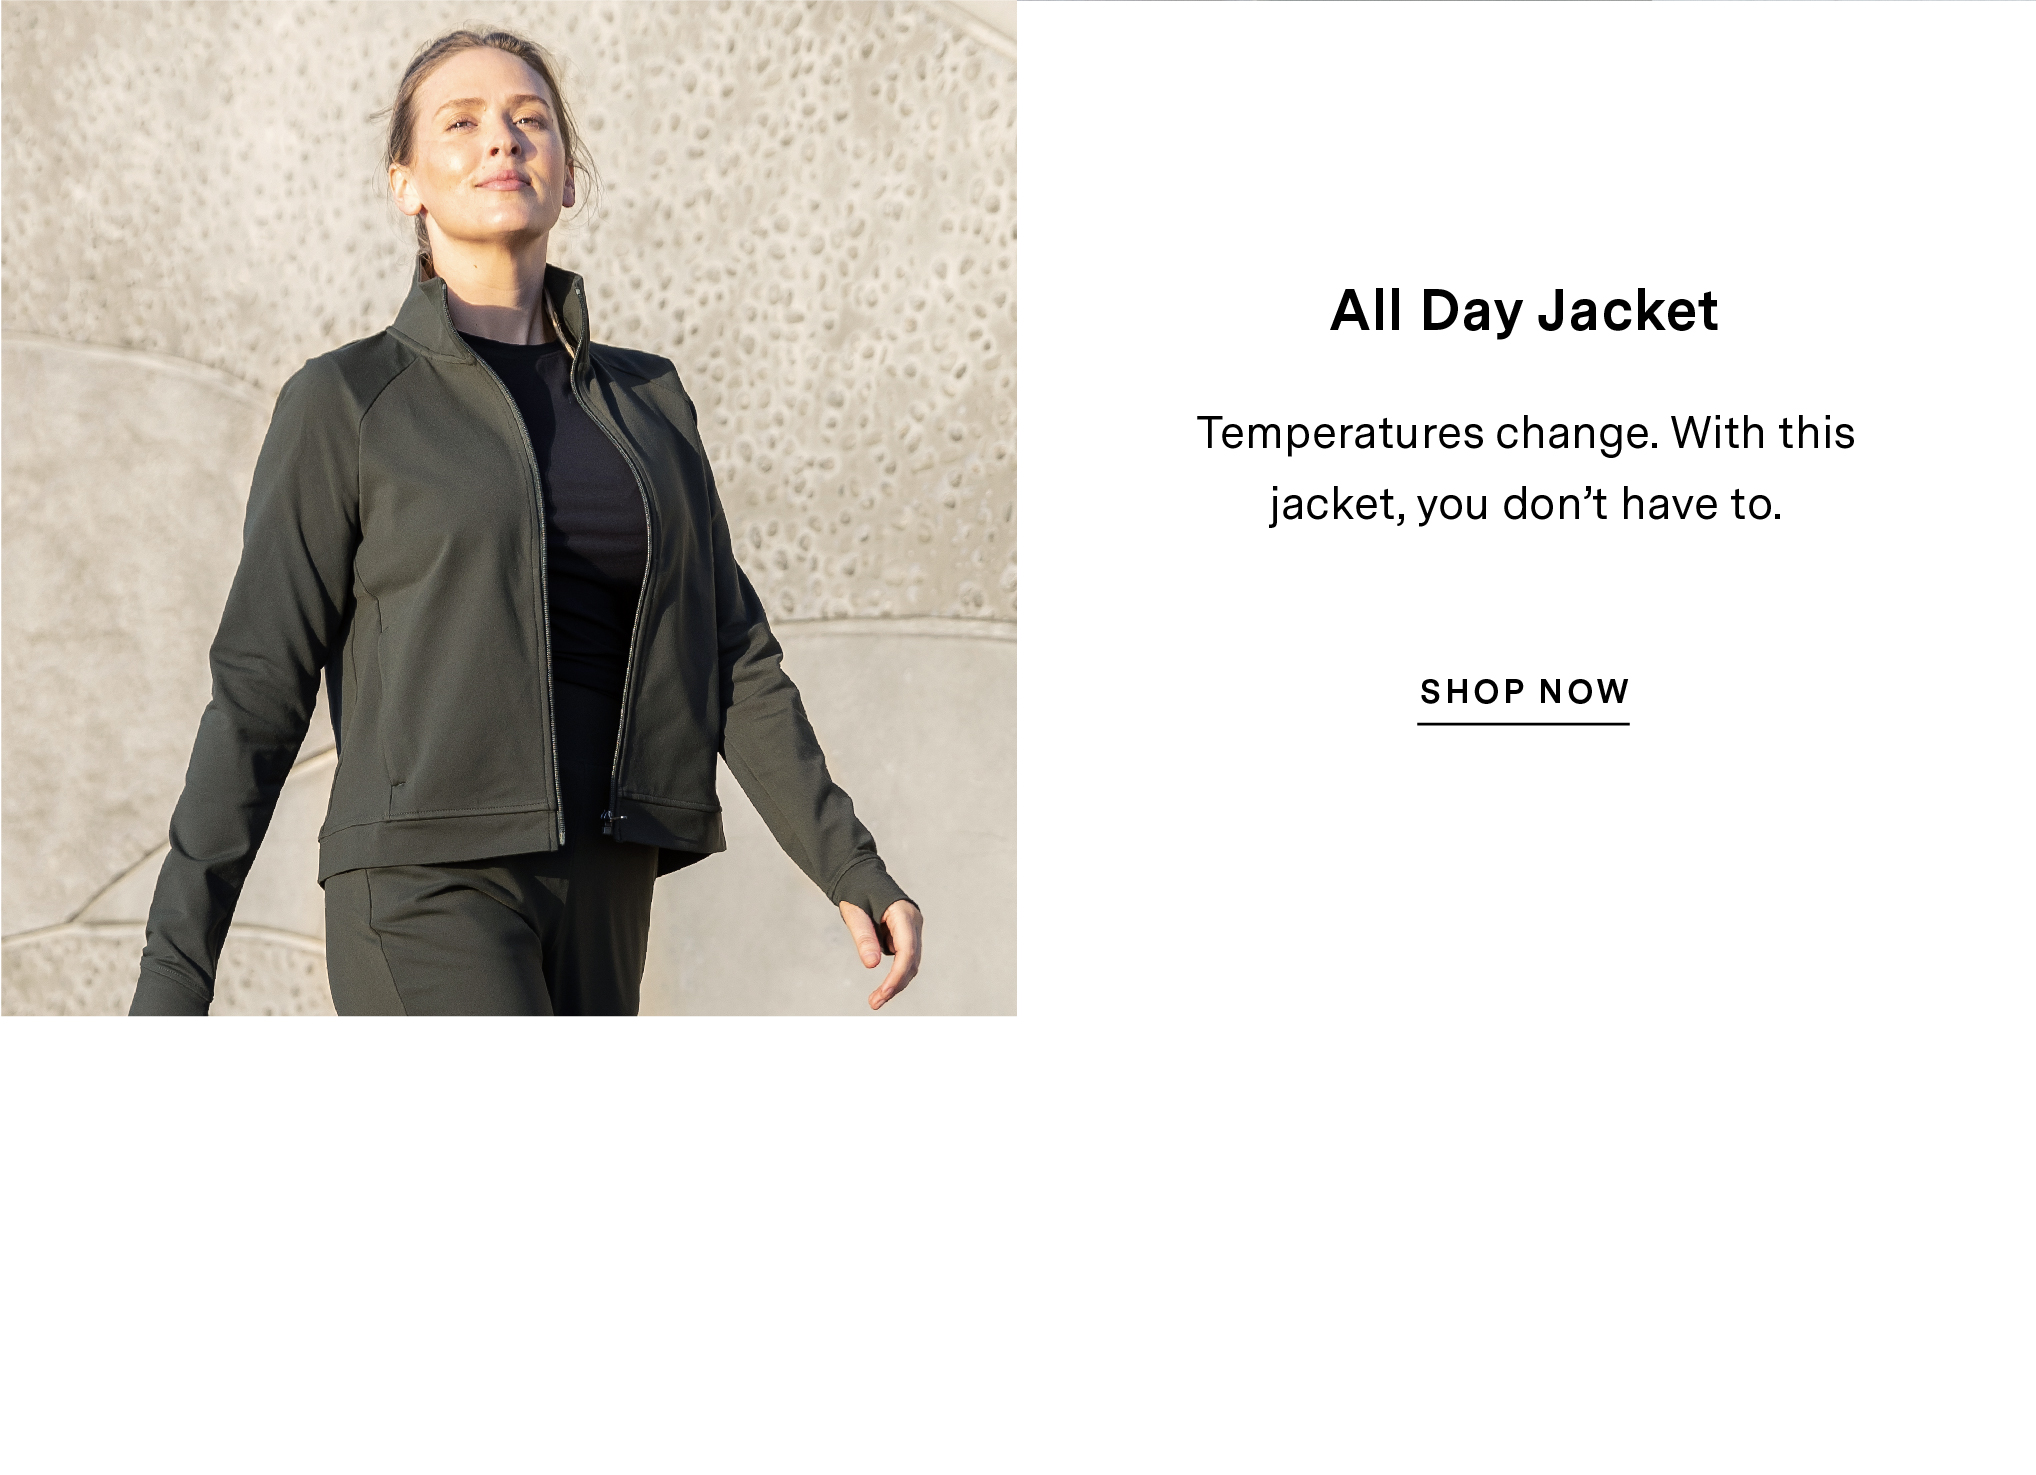 All Day Jacket - Temperatures change. With this jacket, you don't have to. 